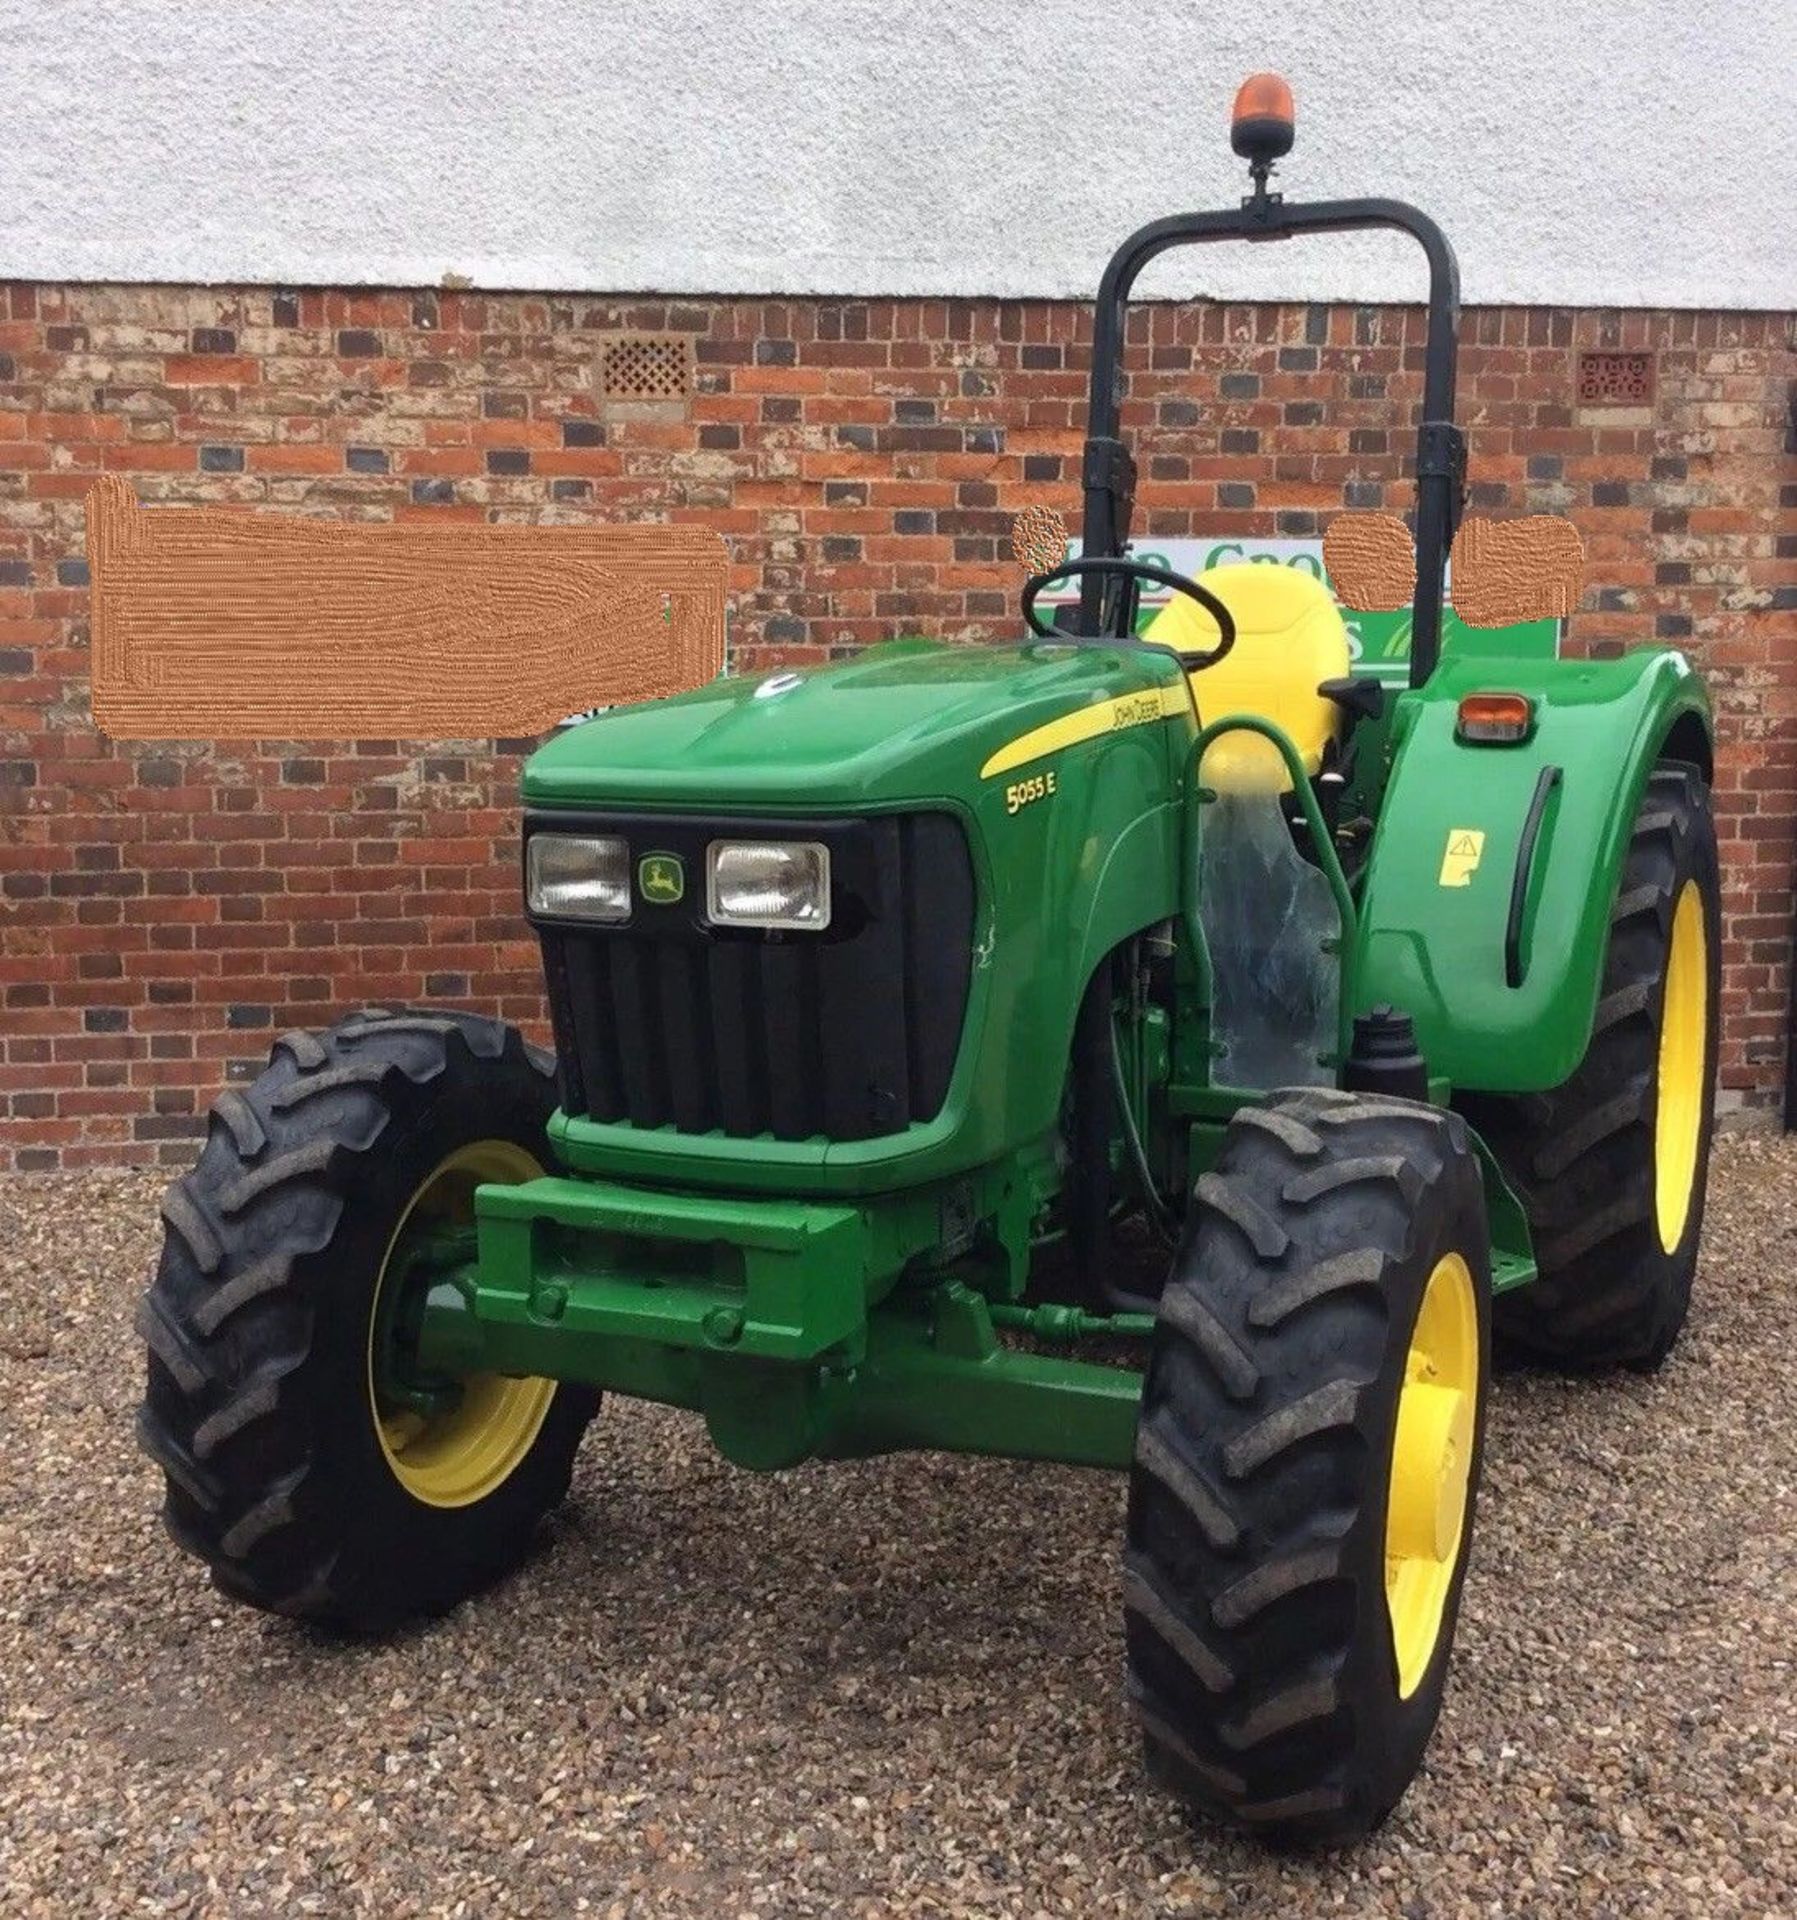 John Deere 5055e Tractor 4x4 50 Hp Tractor Compact Tractor - Image 2 of 10